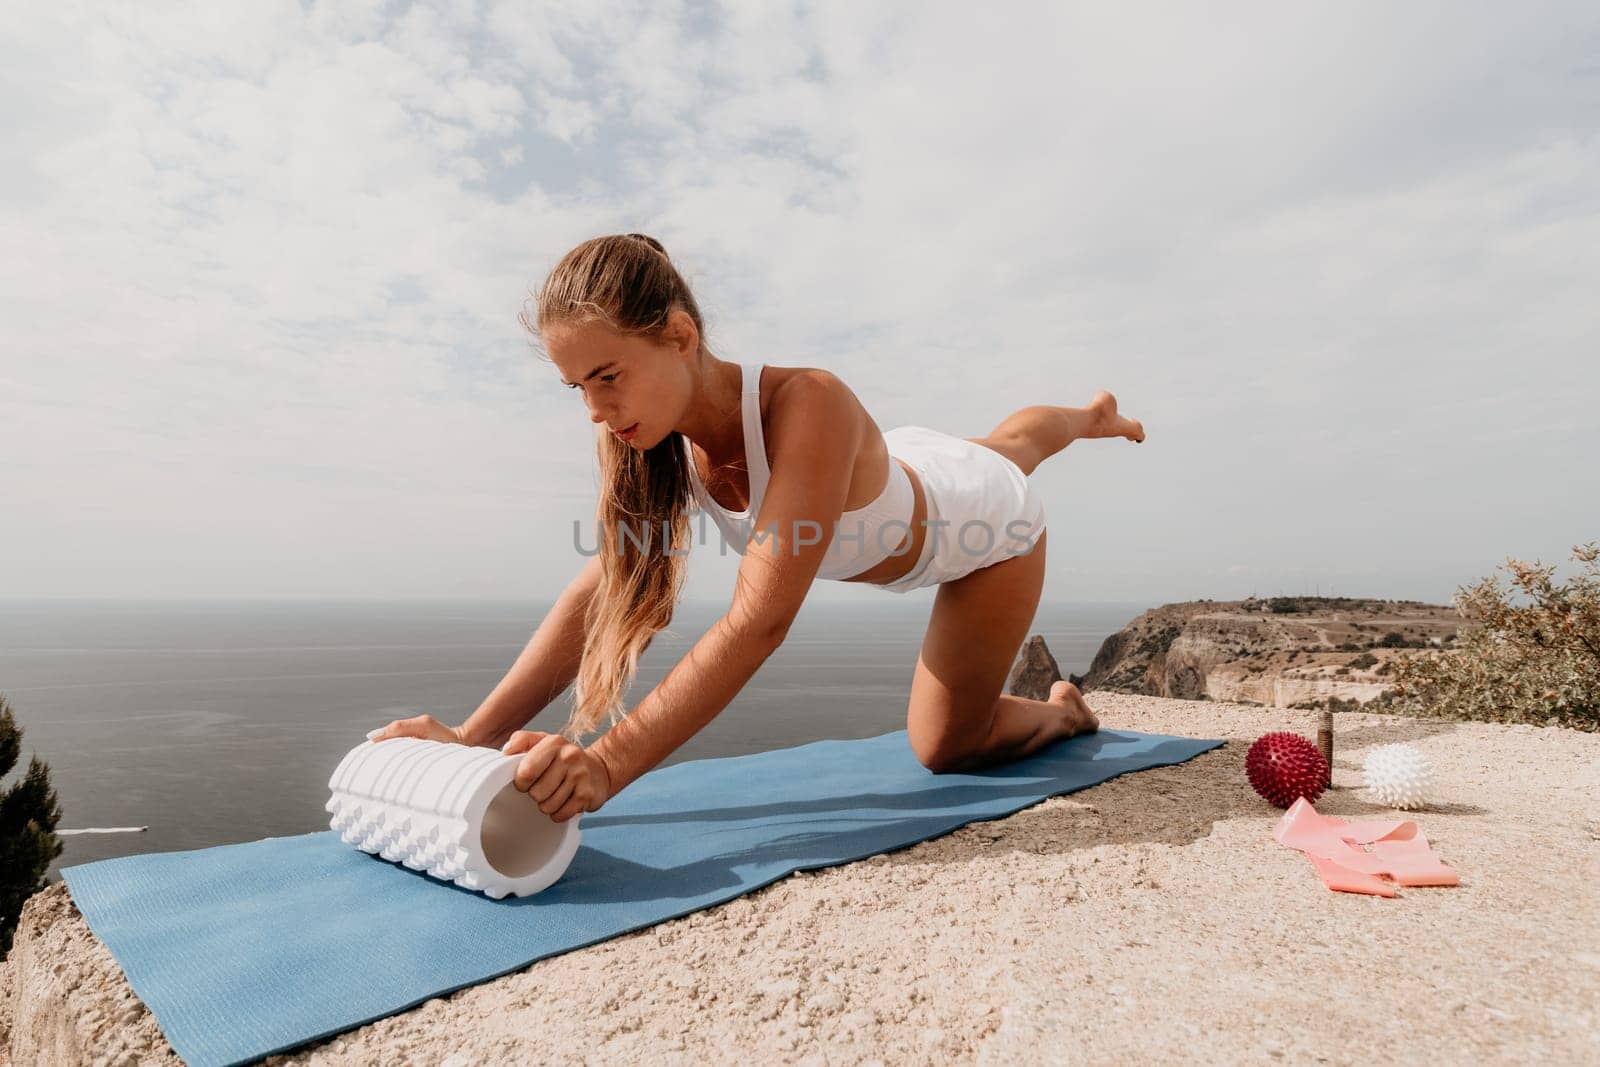 Woman sea pilates. Sporty, middle-aged woman practicing pilates in park near the sea. trains on a yoga mat and exudes a happy and active demeanor, promoting the idea of a healthy lifestyle through exercise and meditation.